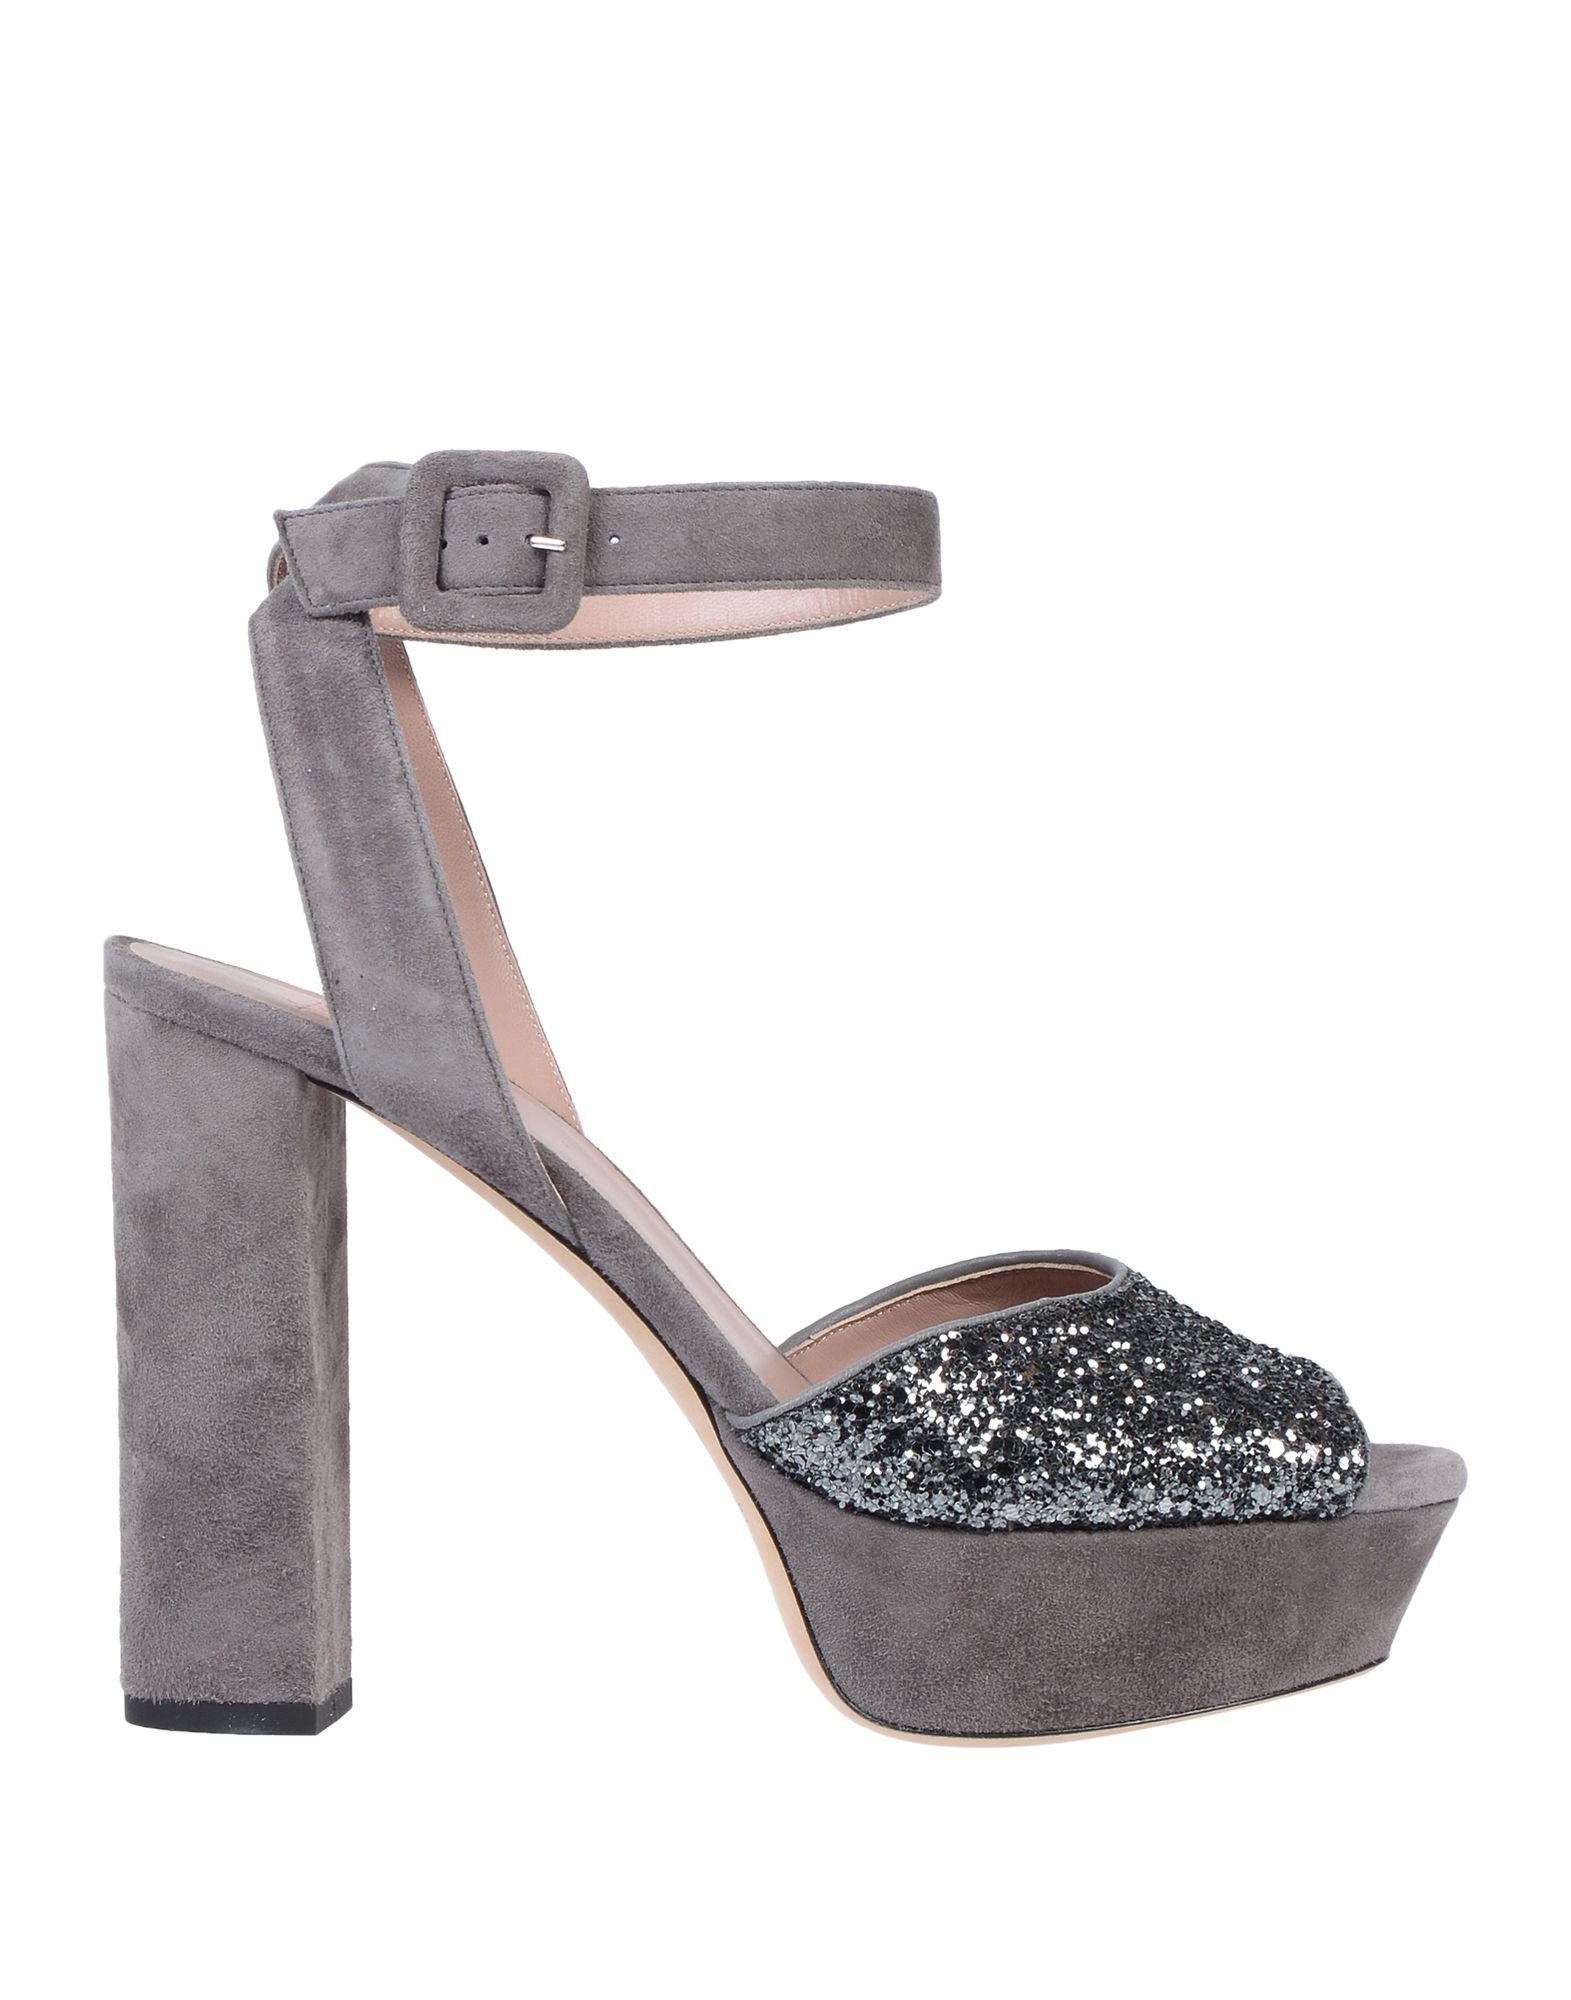 Gianna Meliani Suede Sandals in Grey (Gray) - Lyst